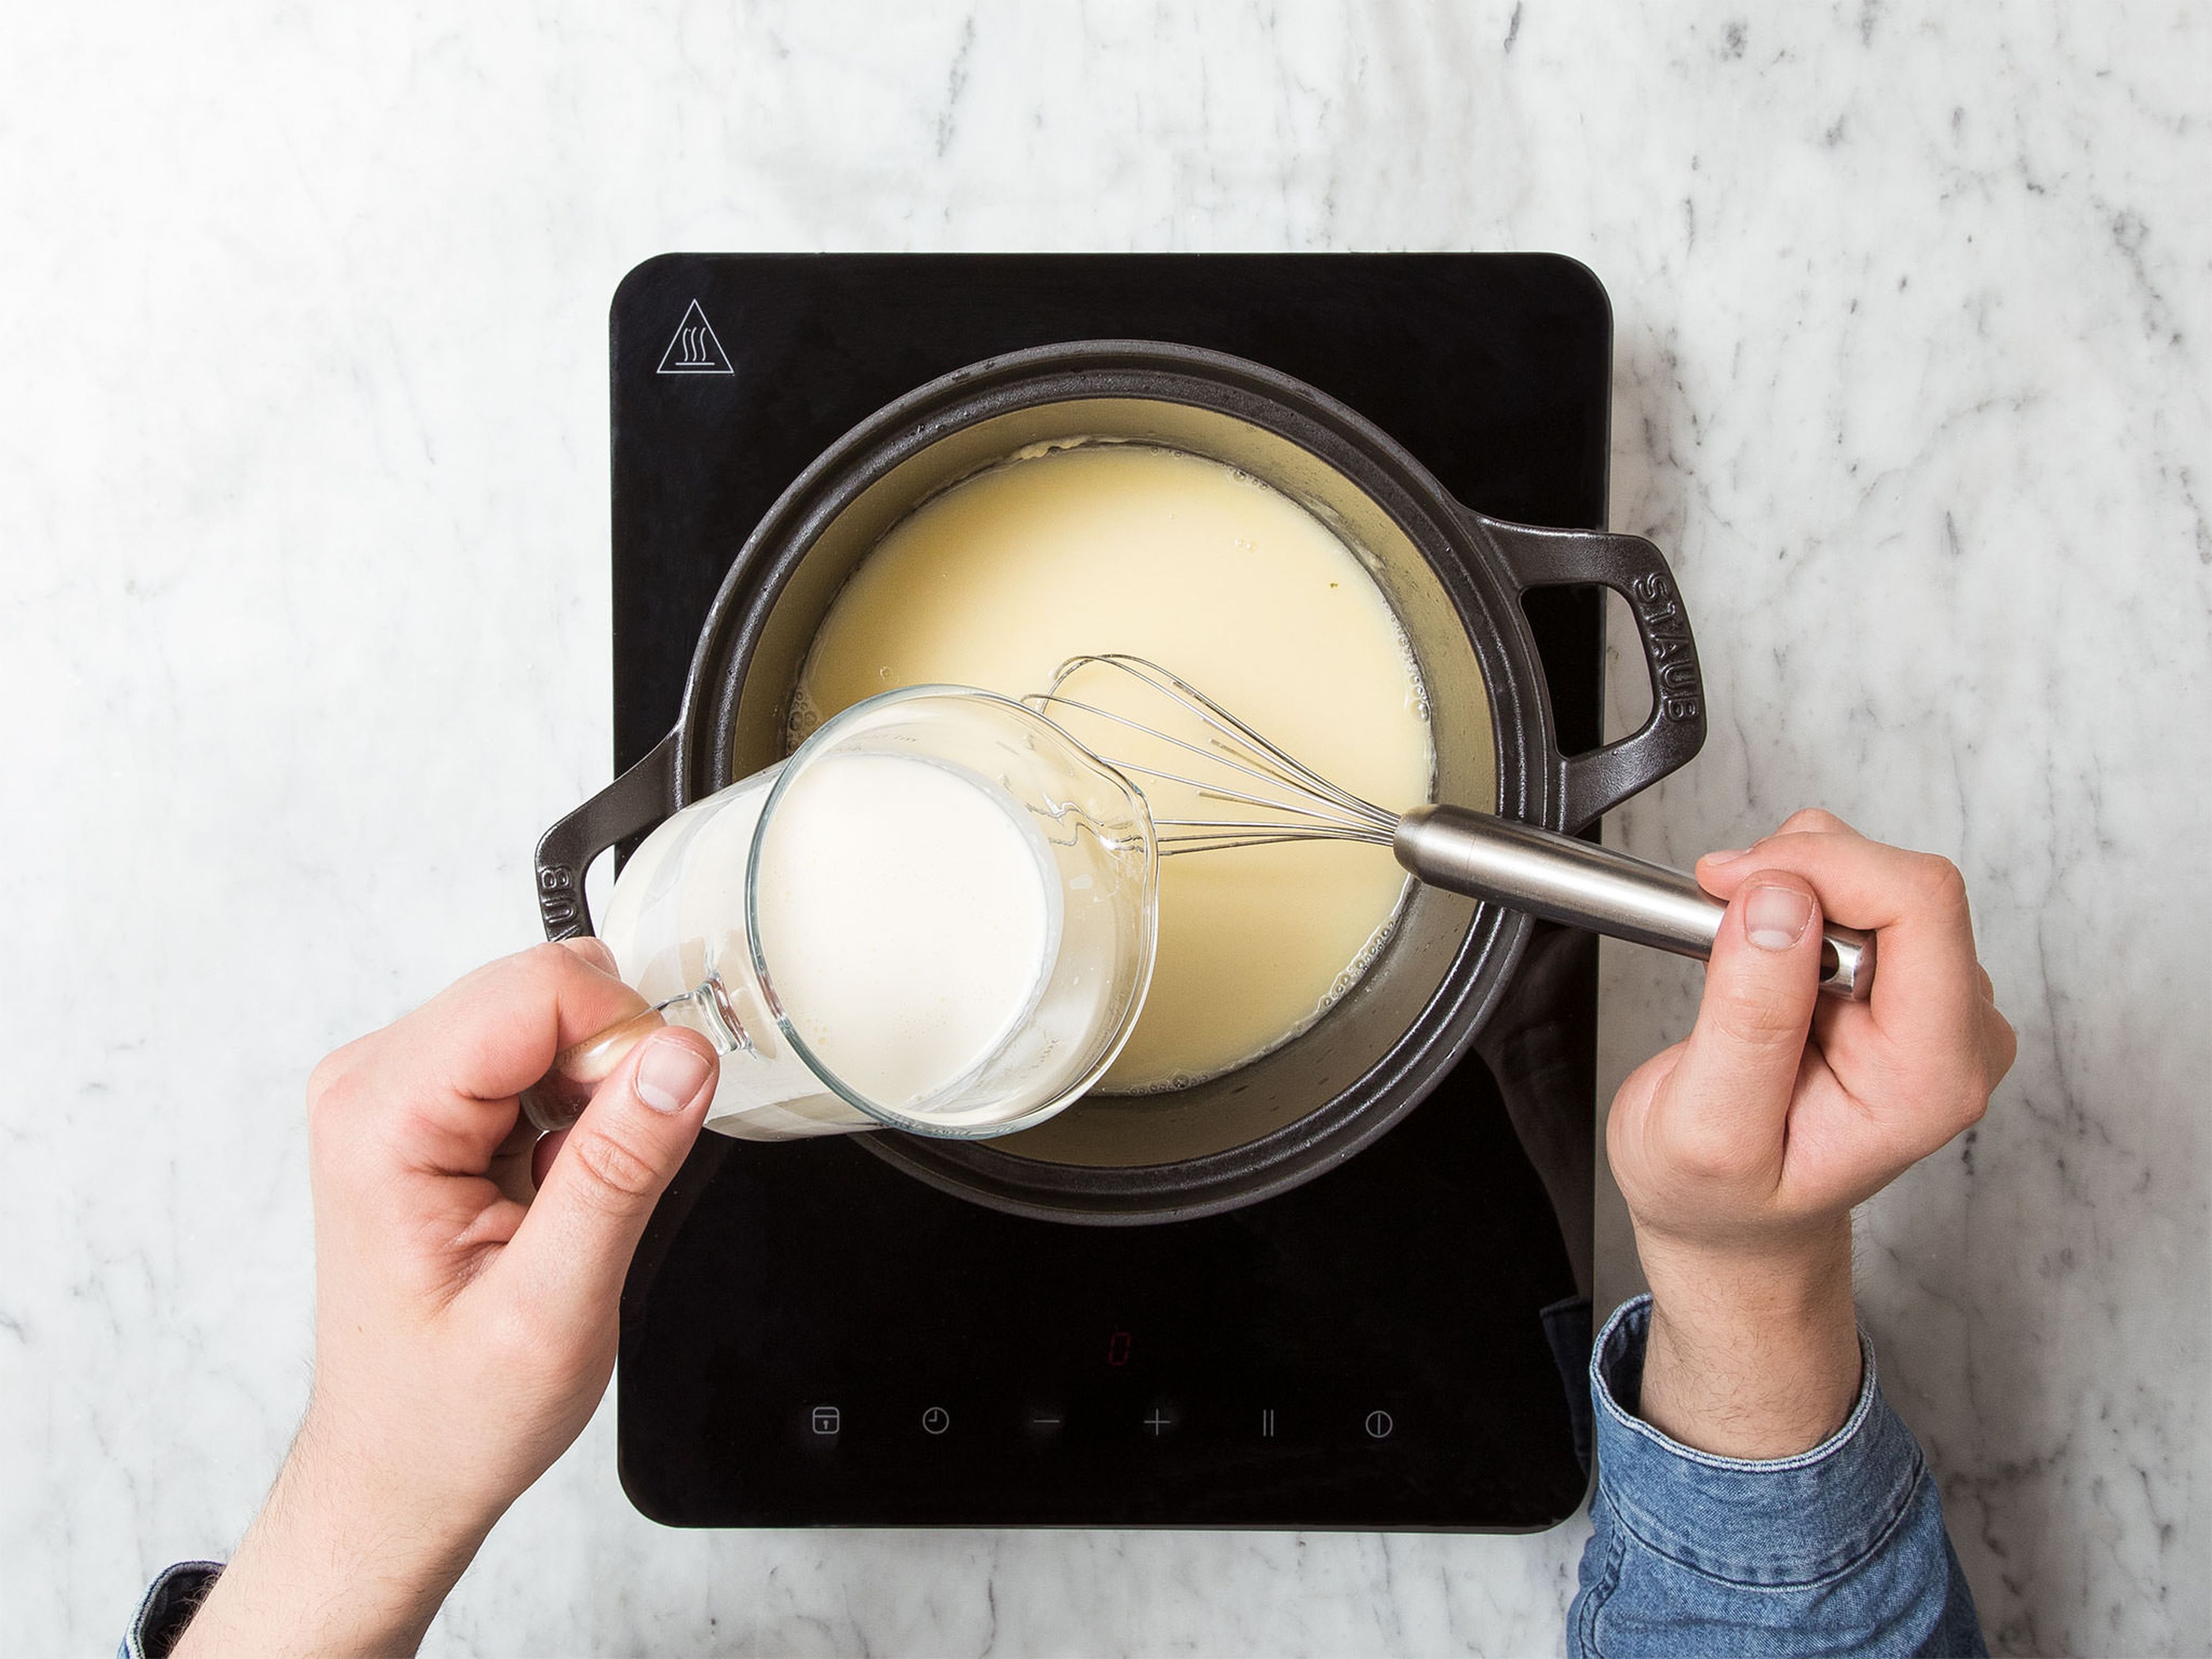 Melt two-thirds of the butter in a pot over medium-low heat. Stir in flour, then add white wine, vegetable broth, and heavy cream and whisk to combine. Season with salt, pepper, nutmeg, and sugar to taste. Let simmer over medium heat for approx. 5 min. while whisking.